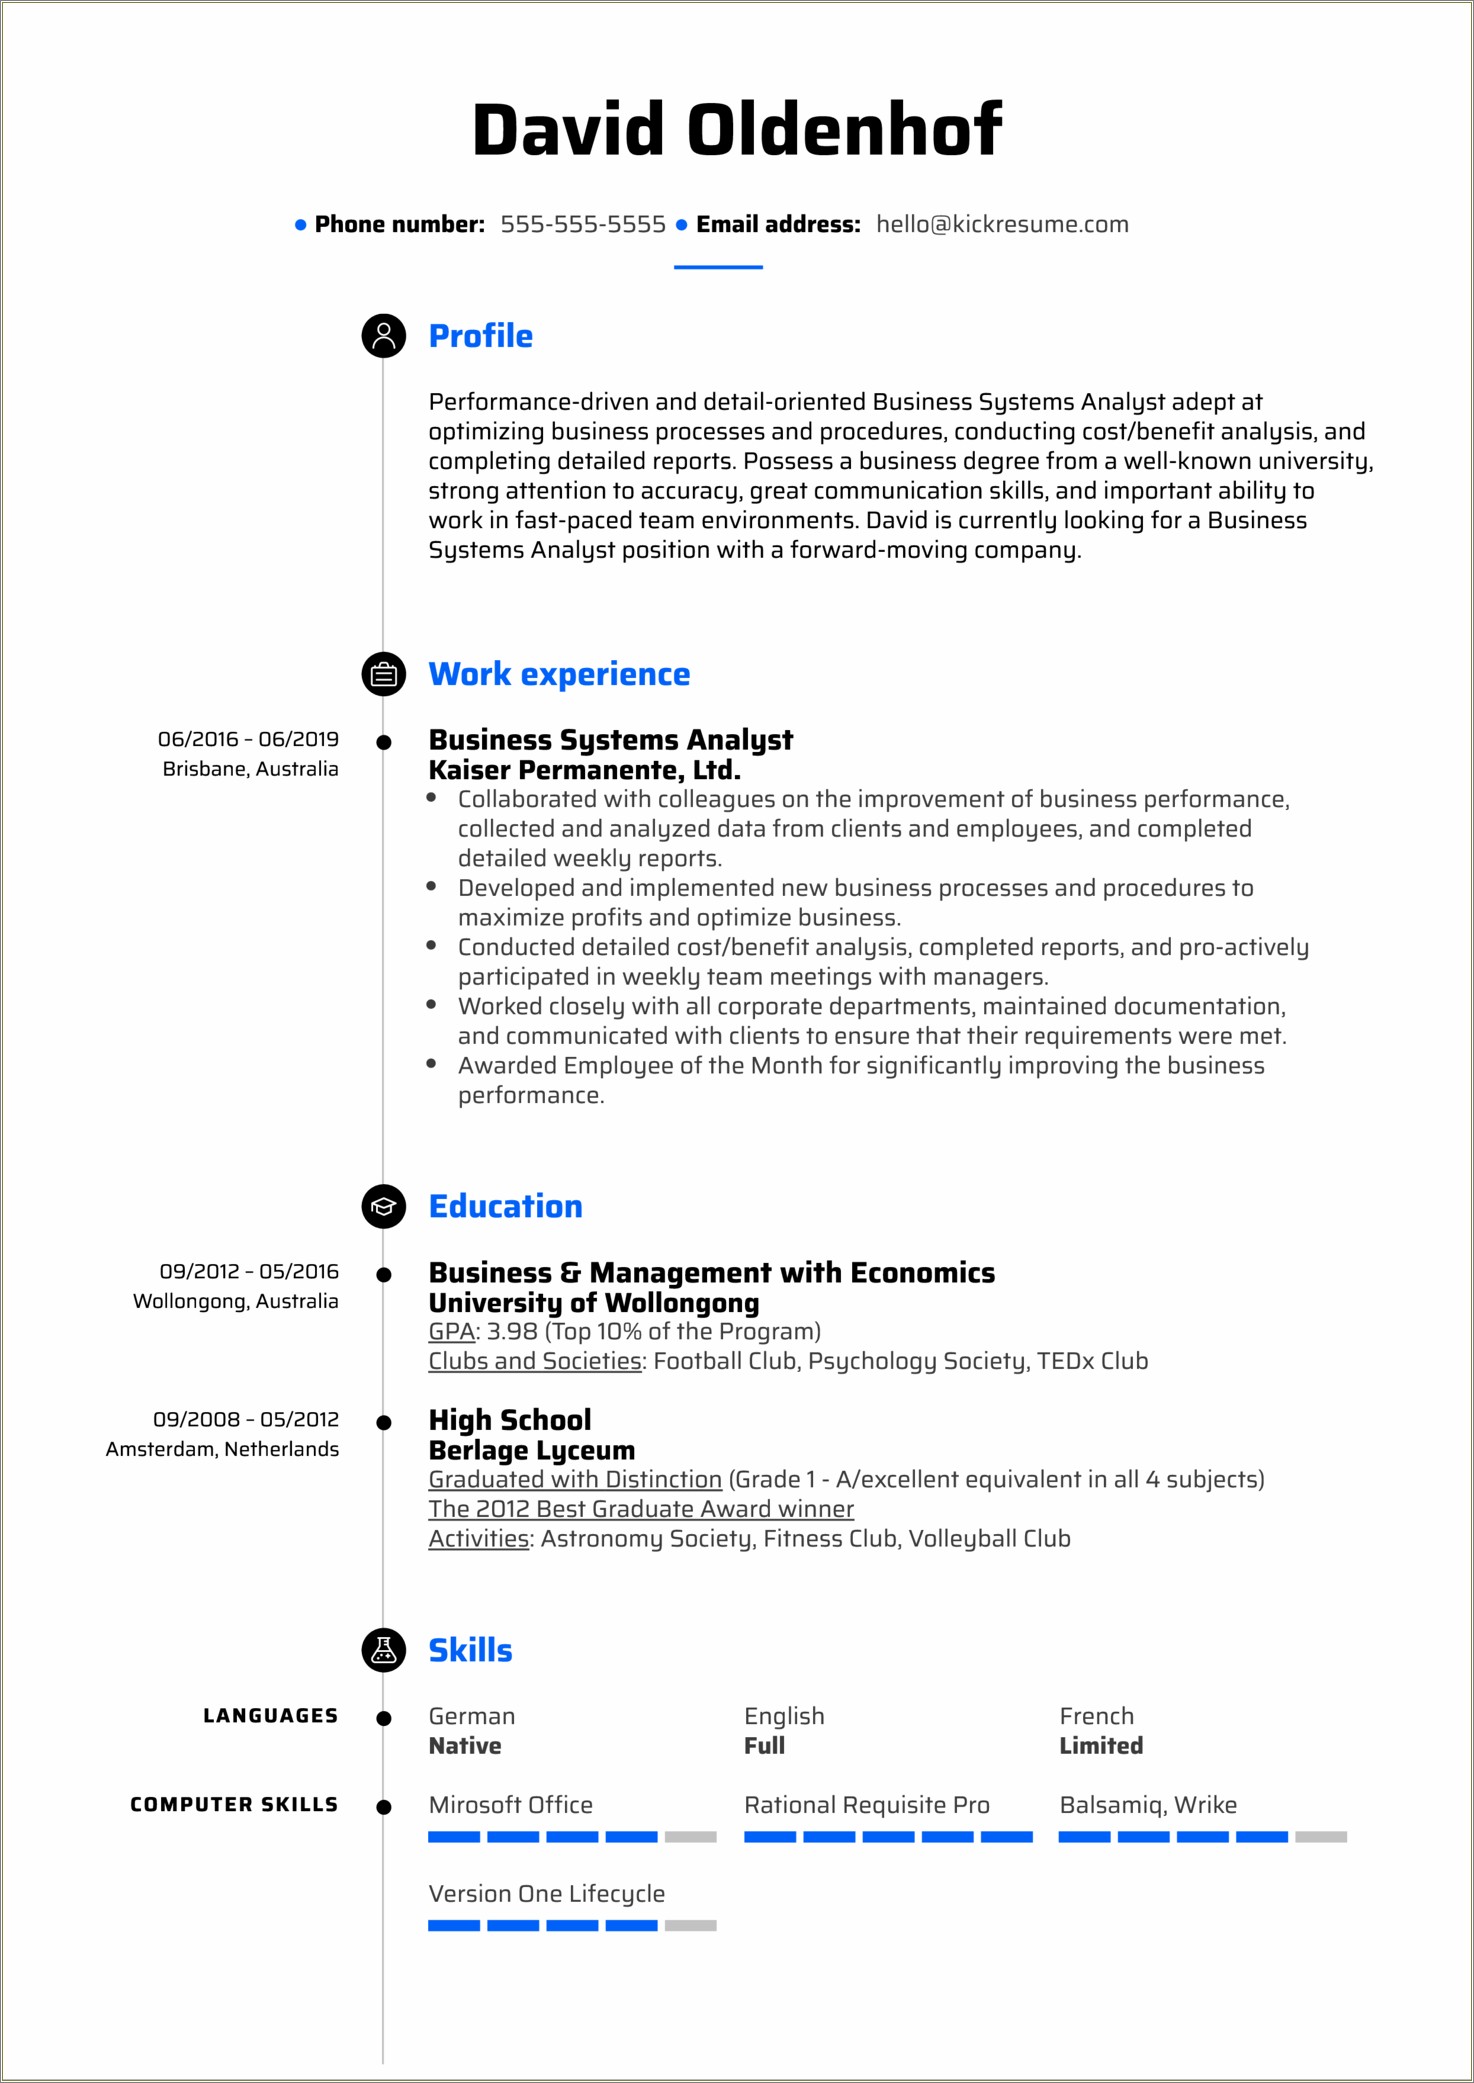 Business Analyst 3 Years Experience Resume